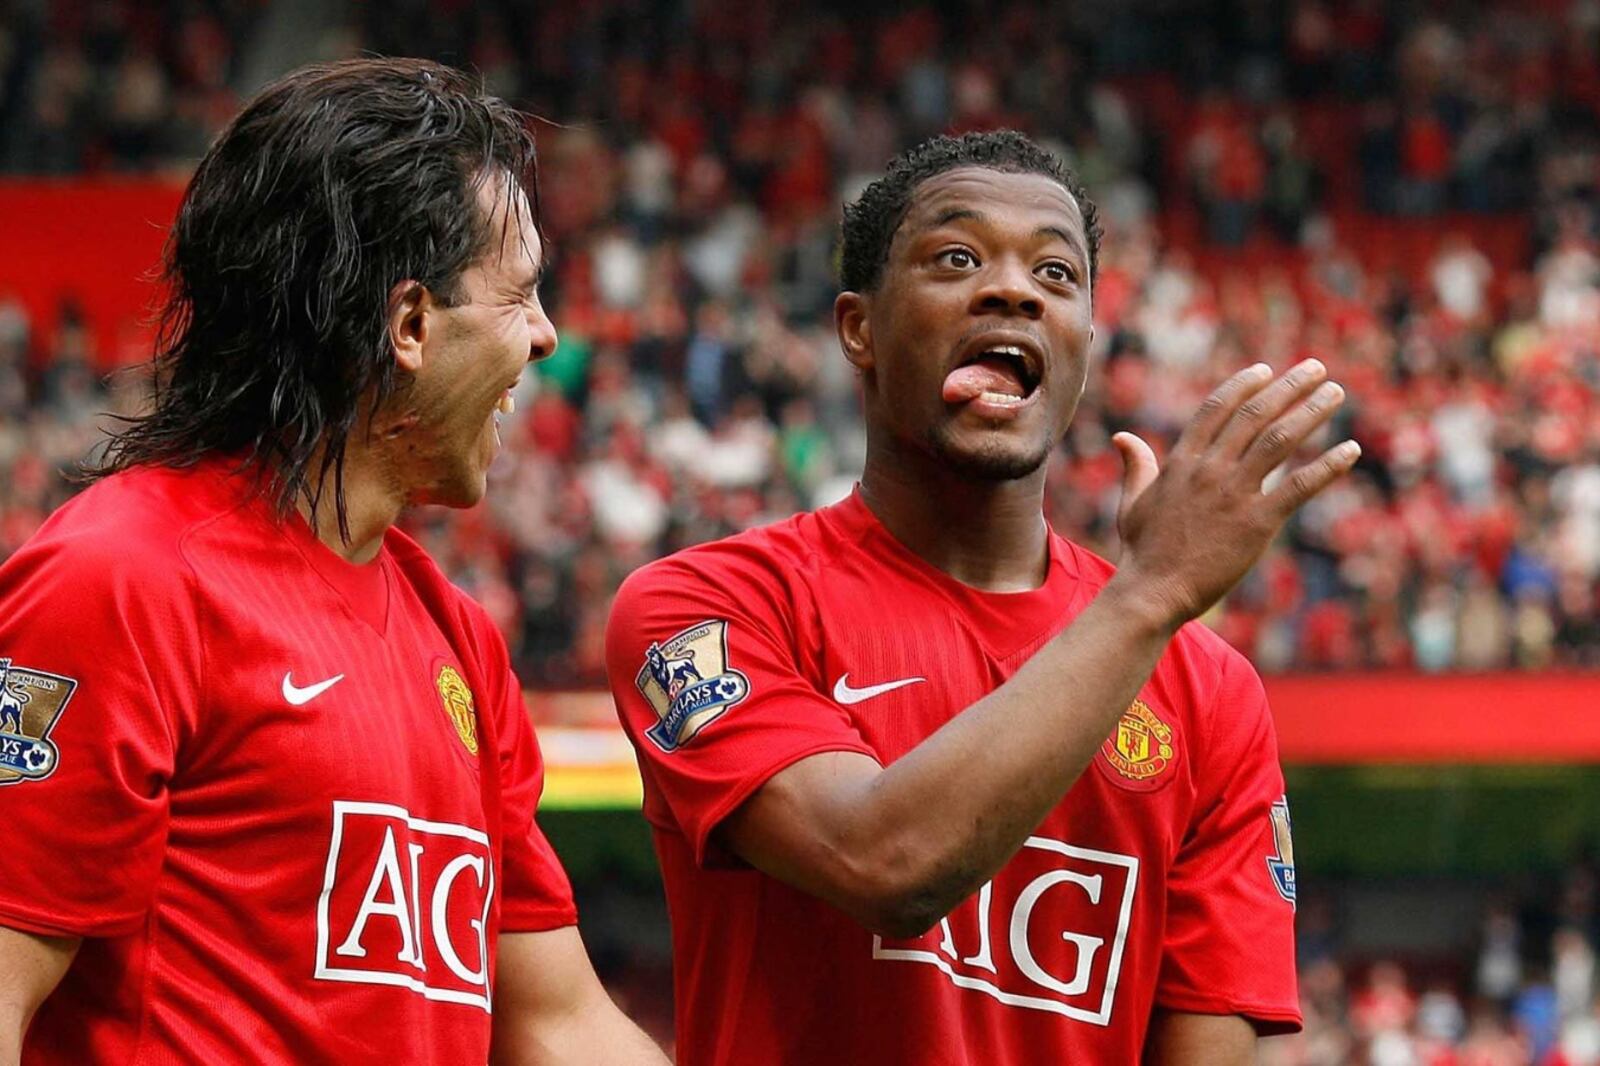 Patrice Evra made fun of Carlos Tevez on Instagram and made all his fans laugh